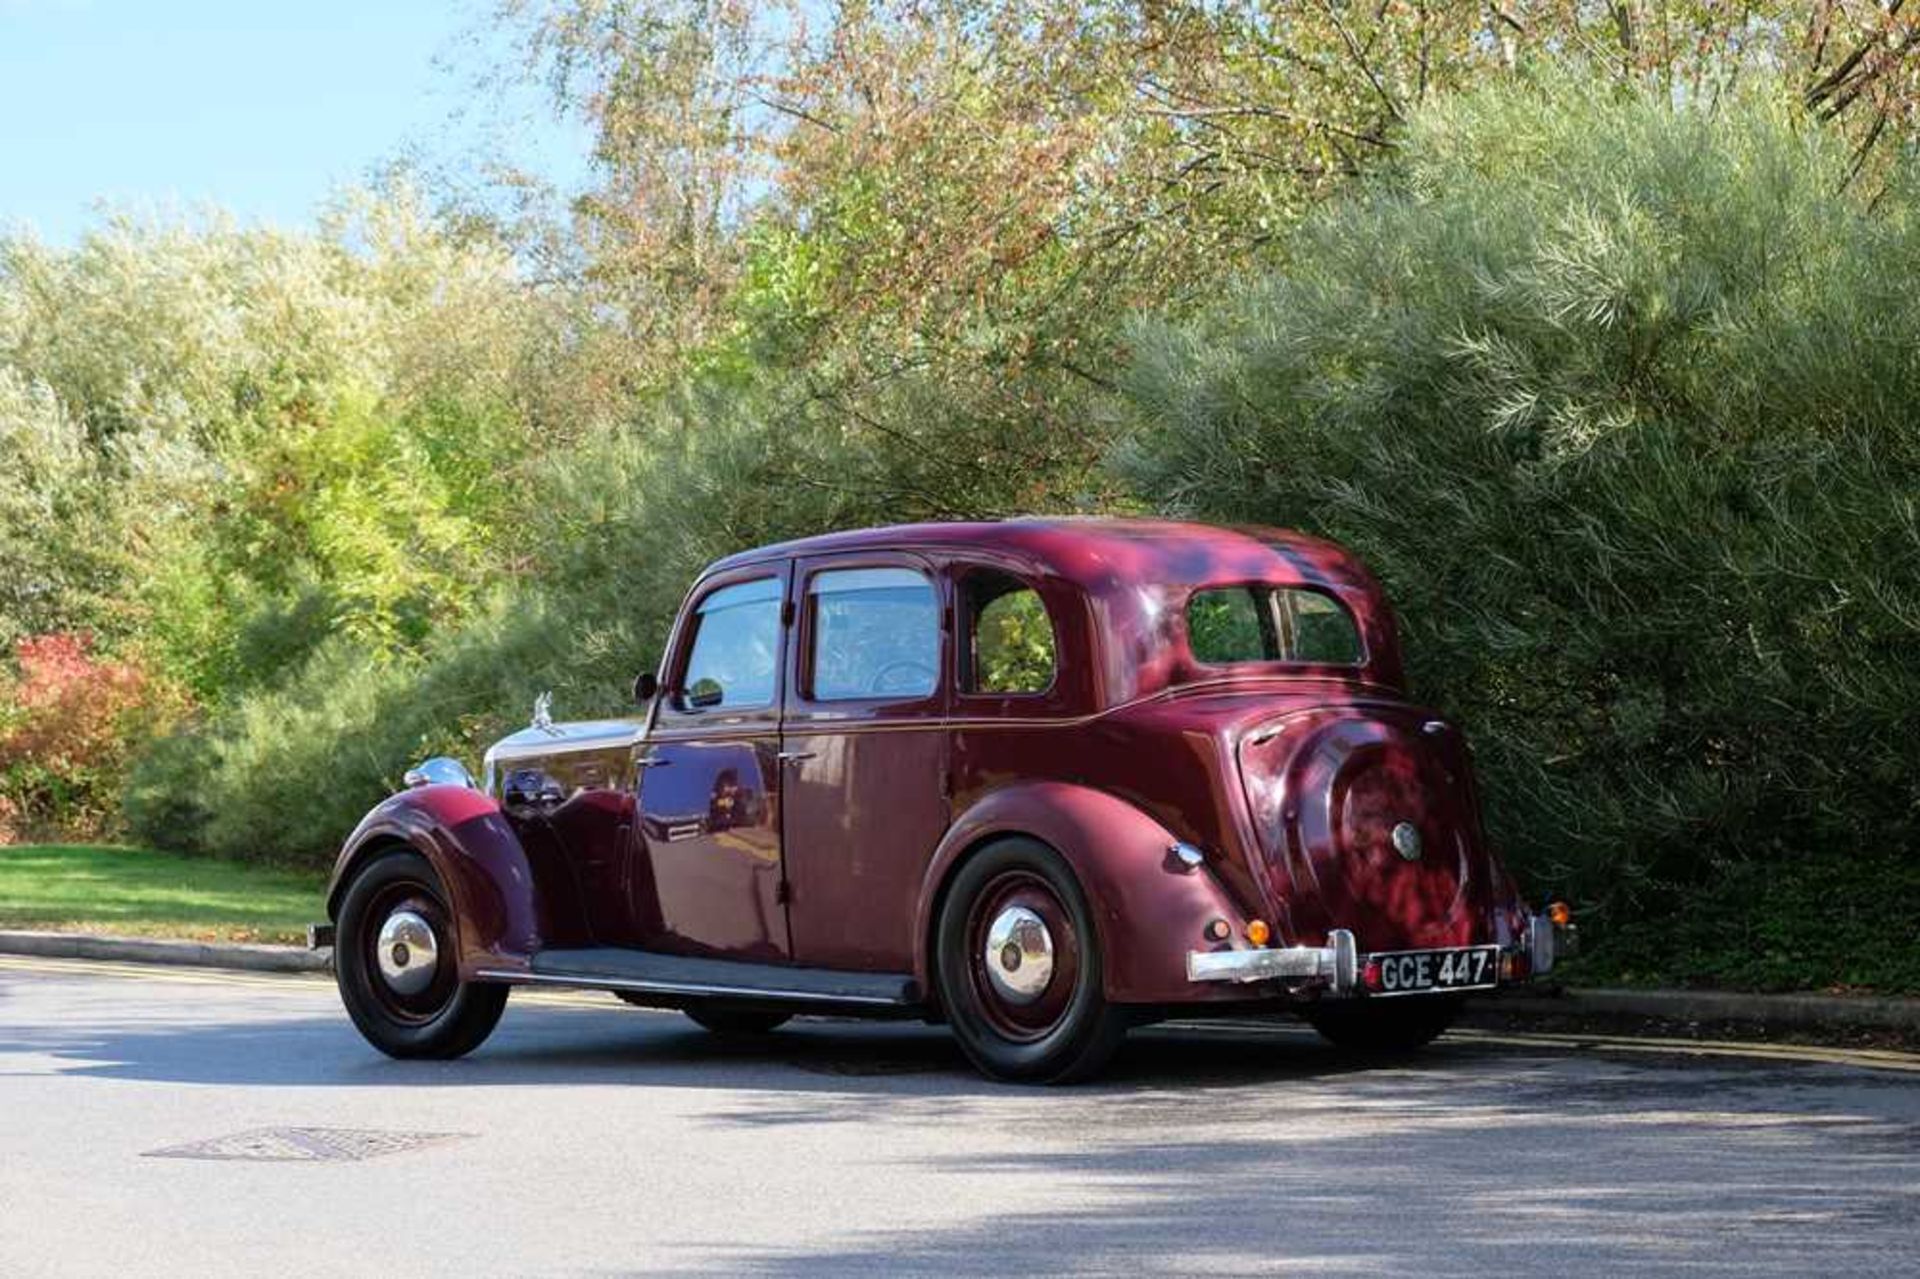 1947 Rover 16 P2 'Six-Light' Saloon - Image 13 of 58